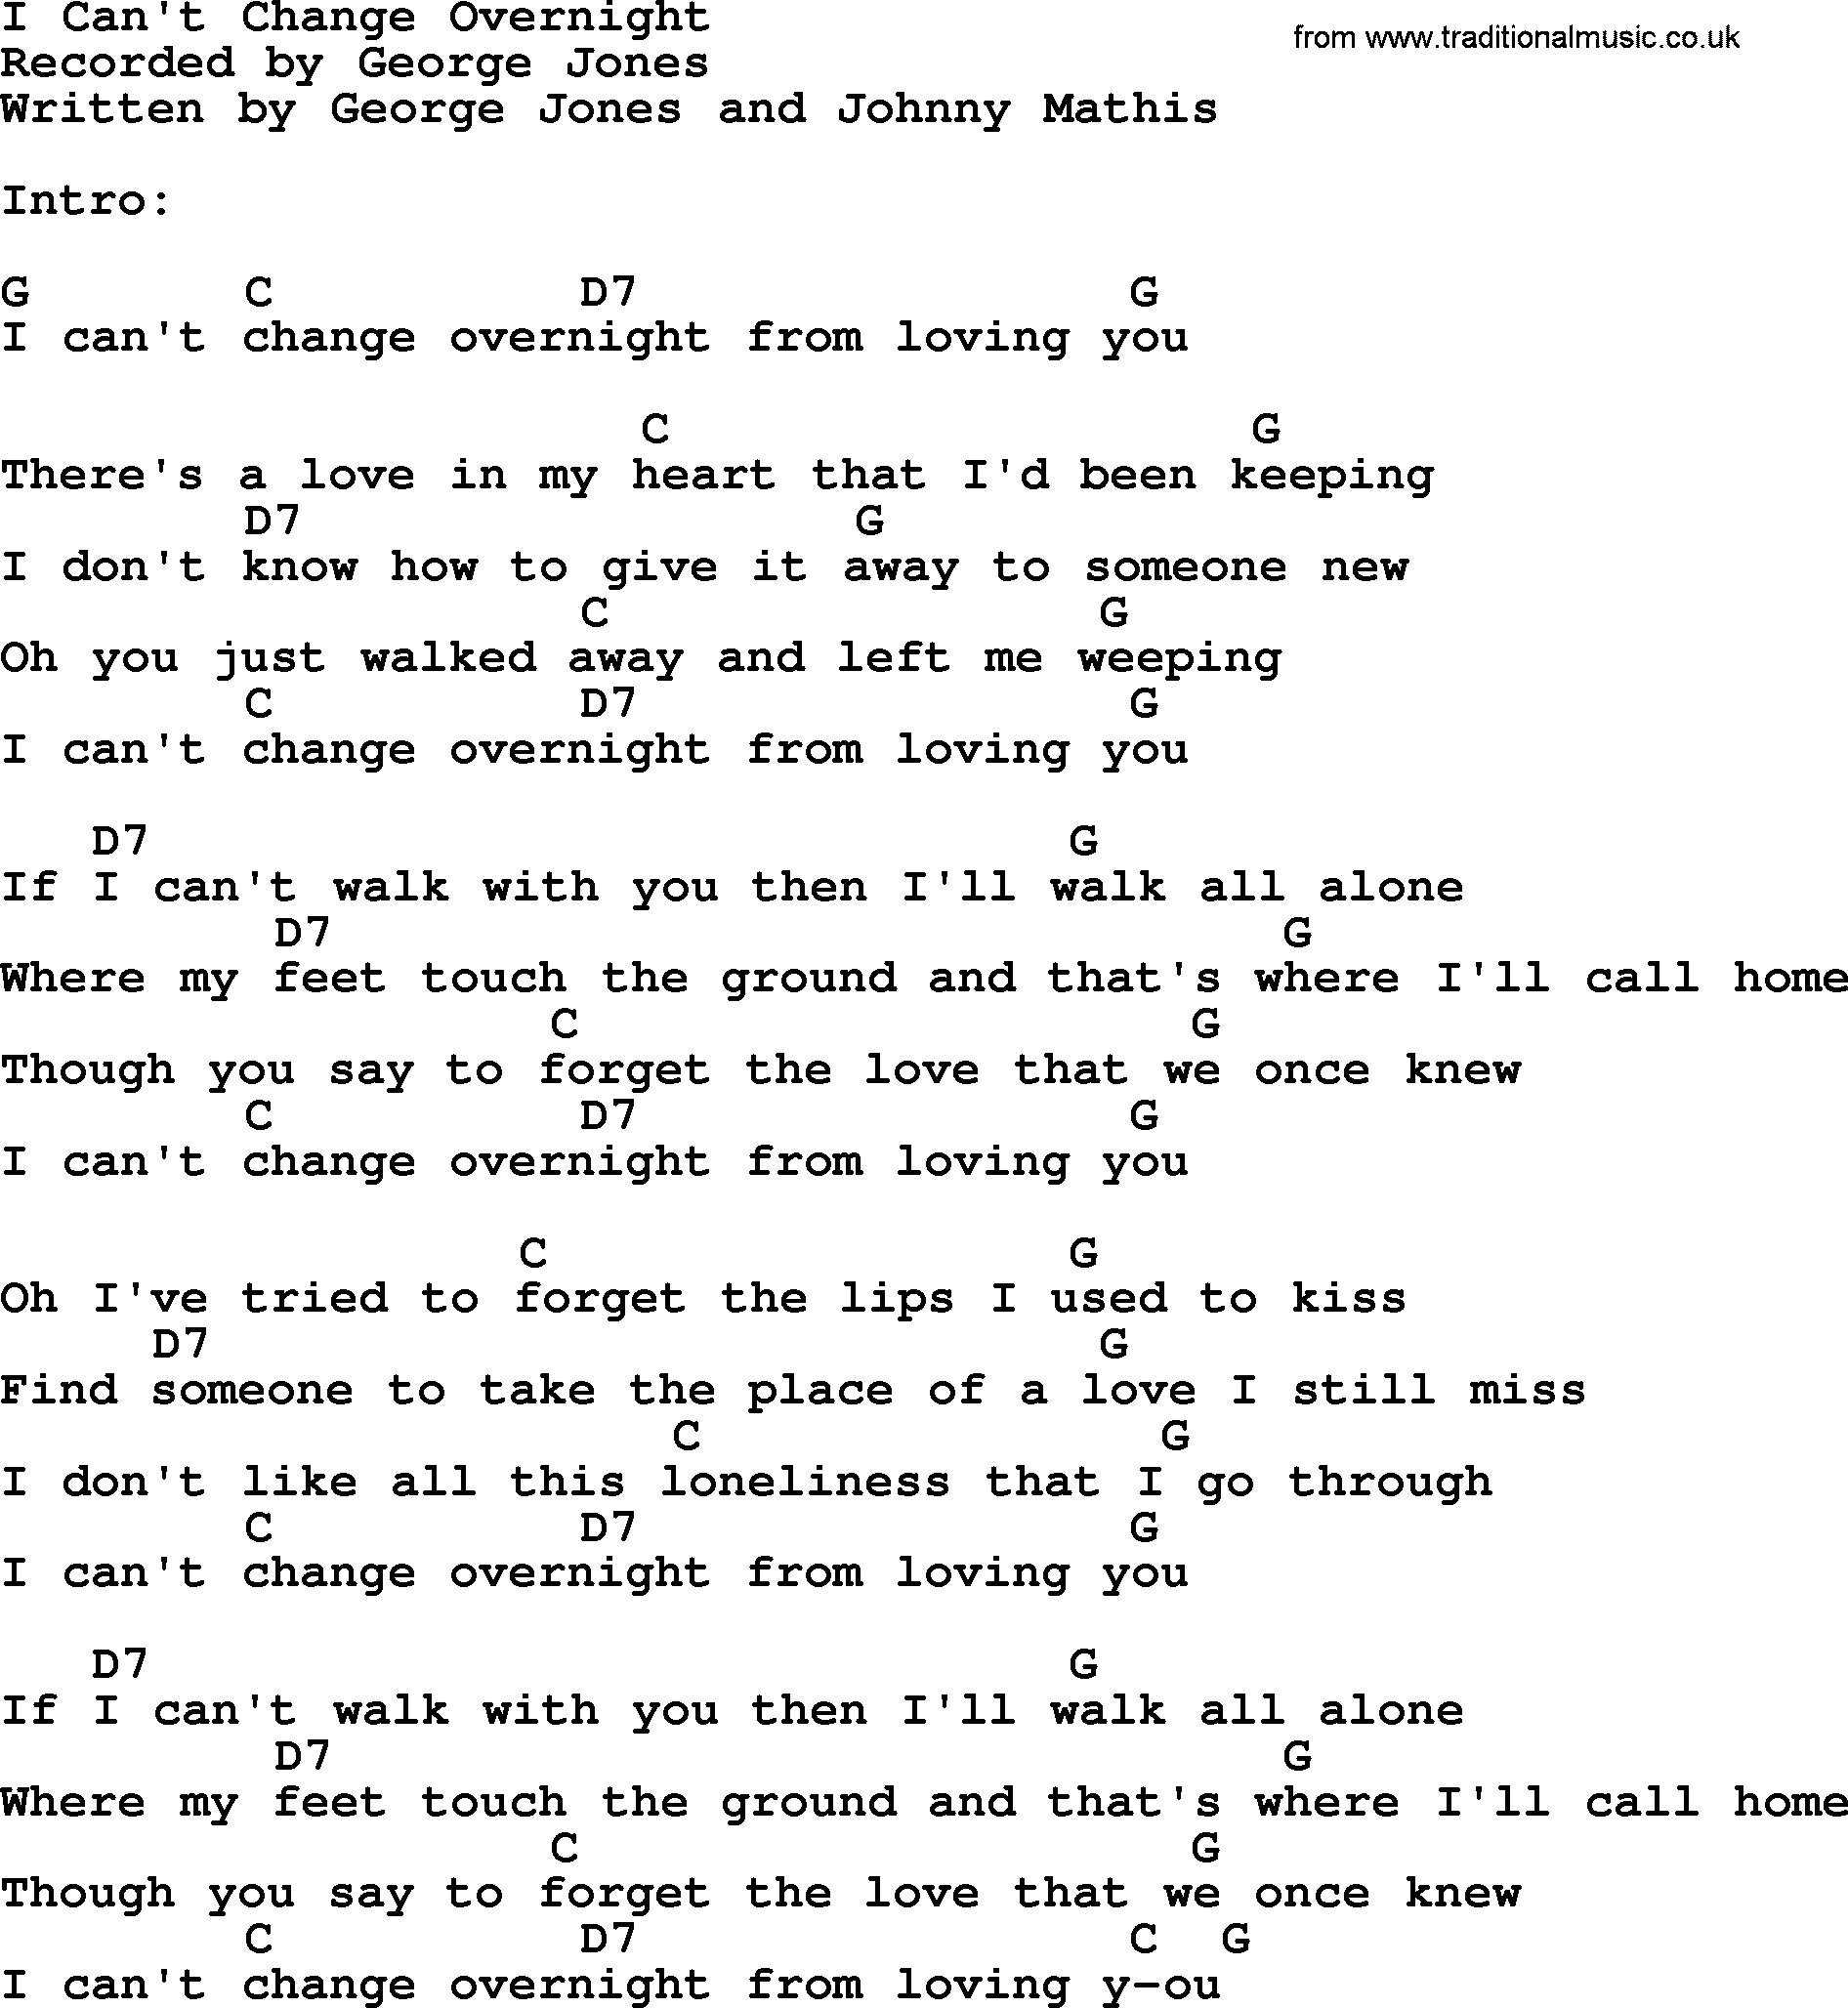 George Jones song: I Can't Change Overnight, lyrics and chords